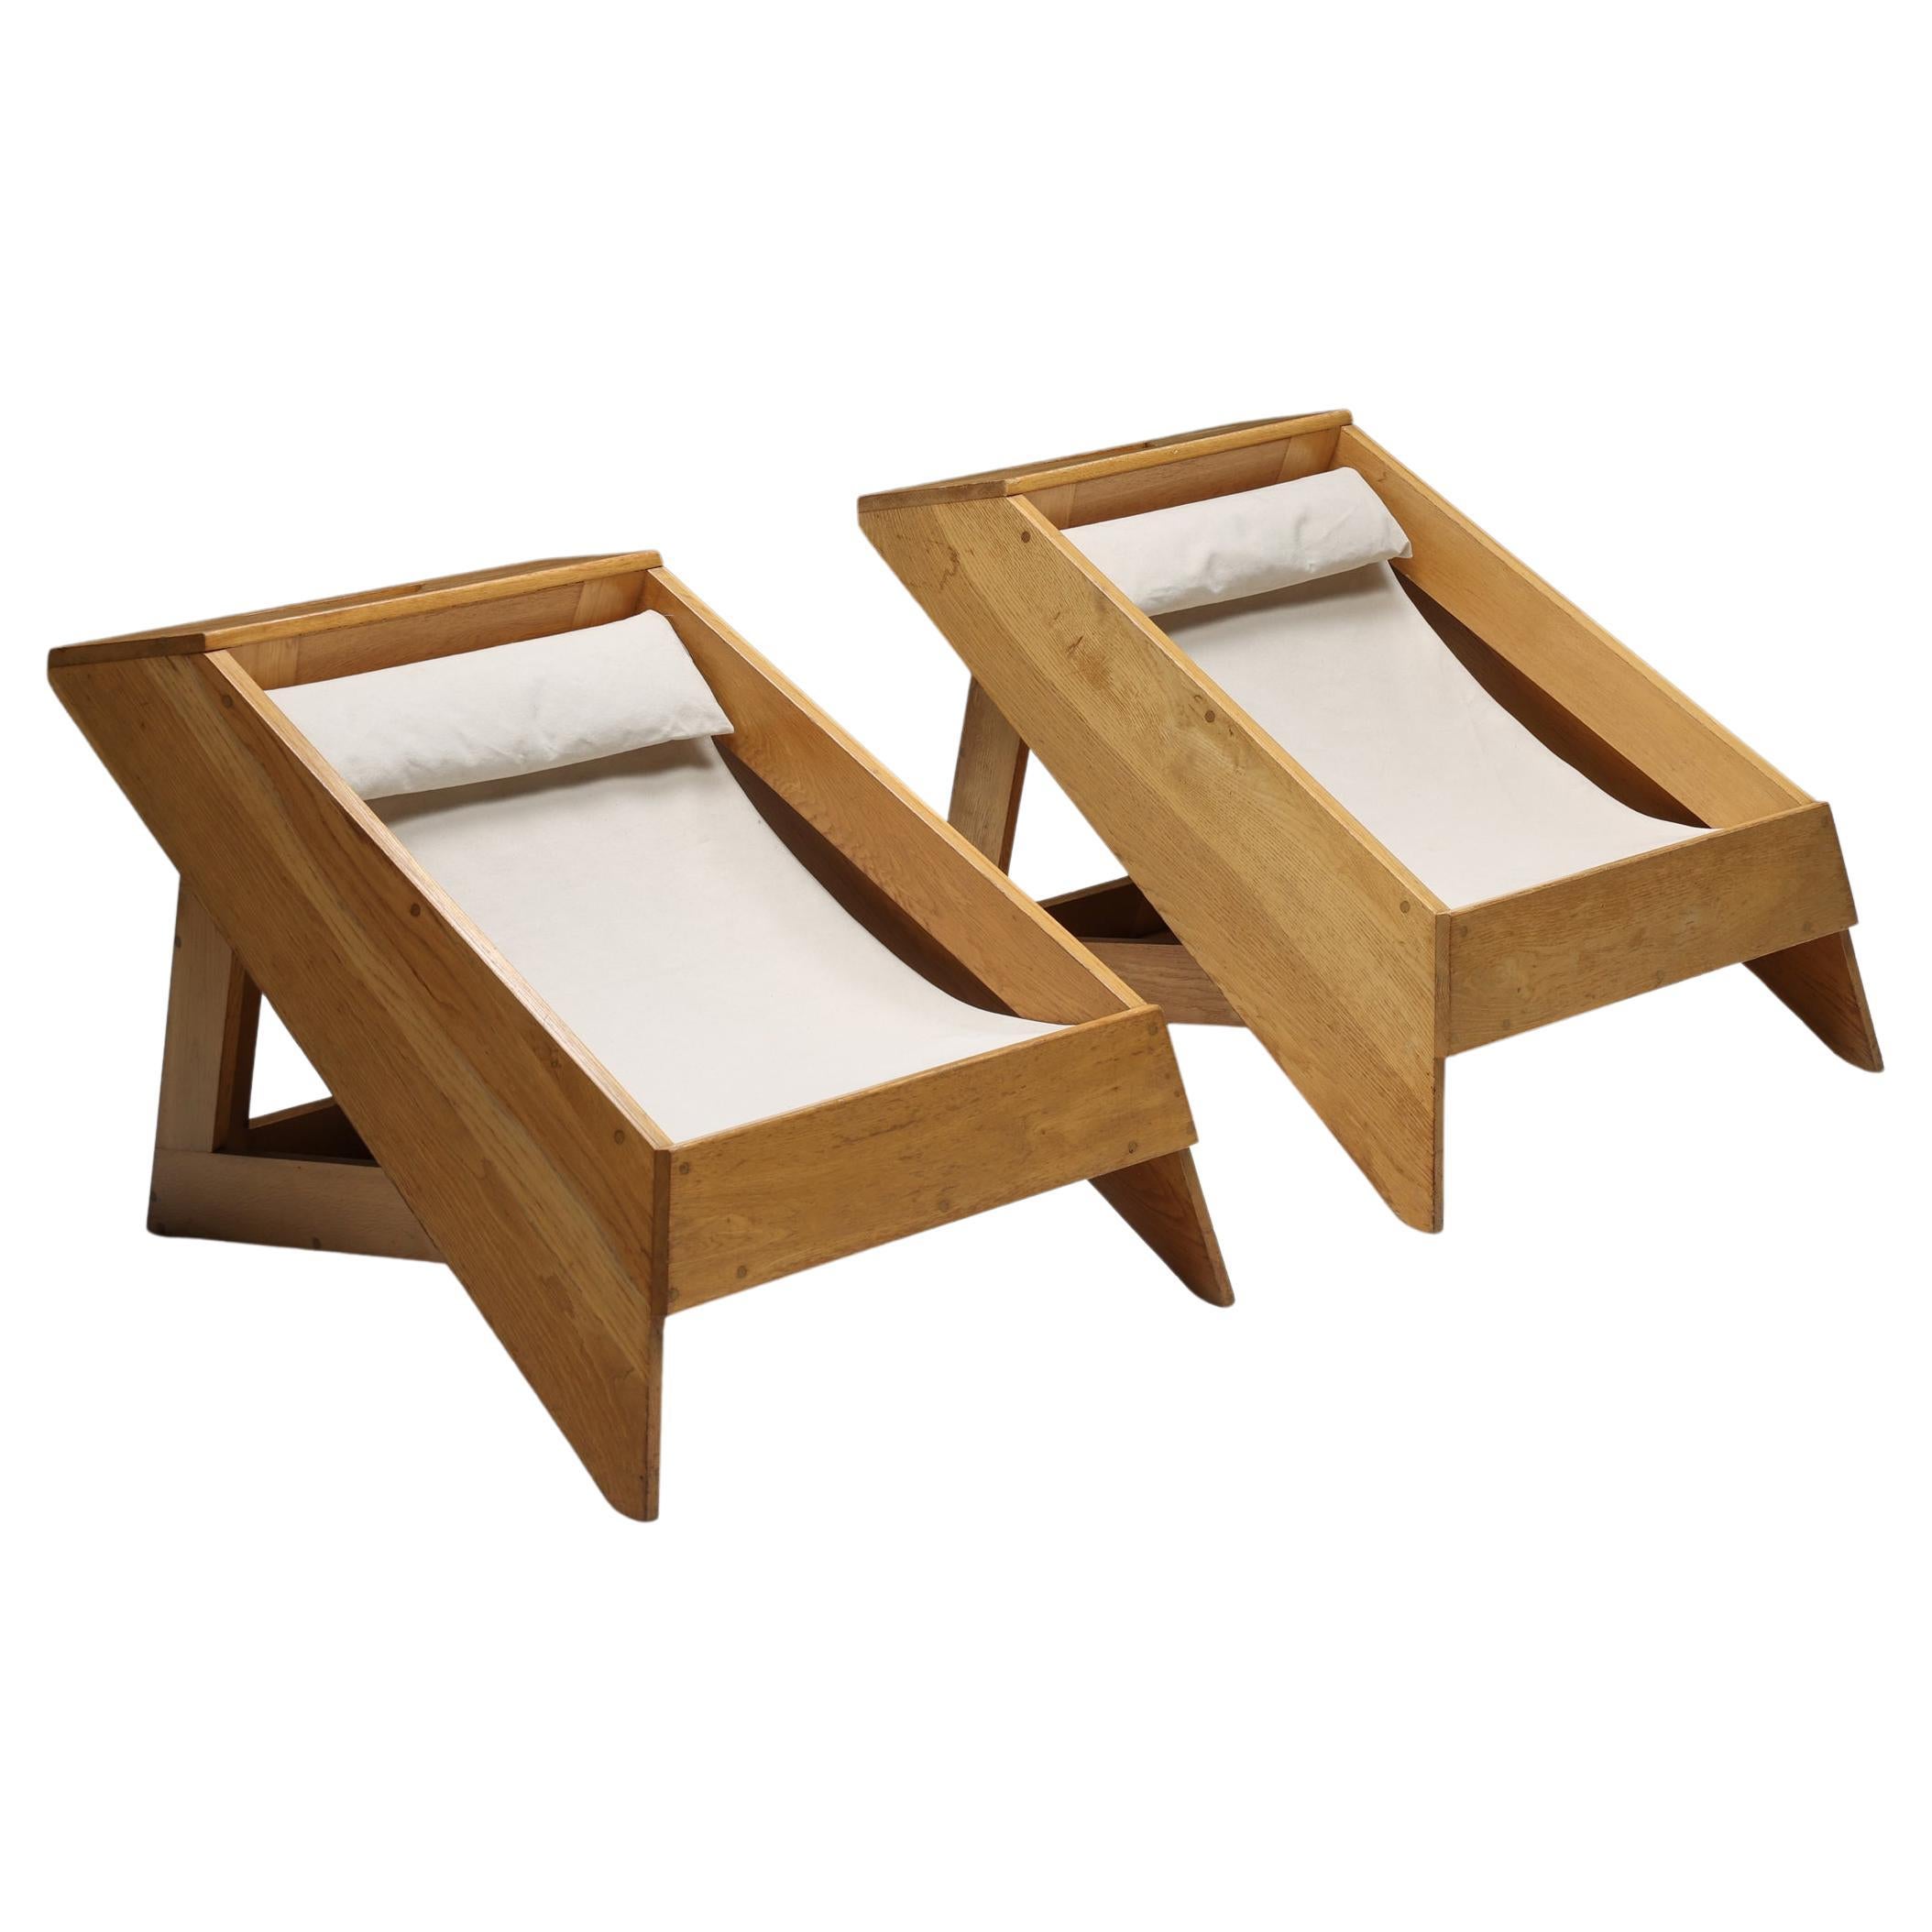 Wooden Architectural Lounge Chairs, Italy, 1960s For Sale